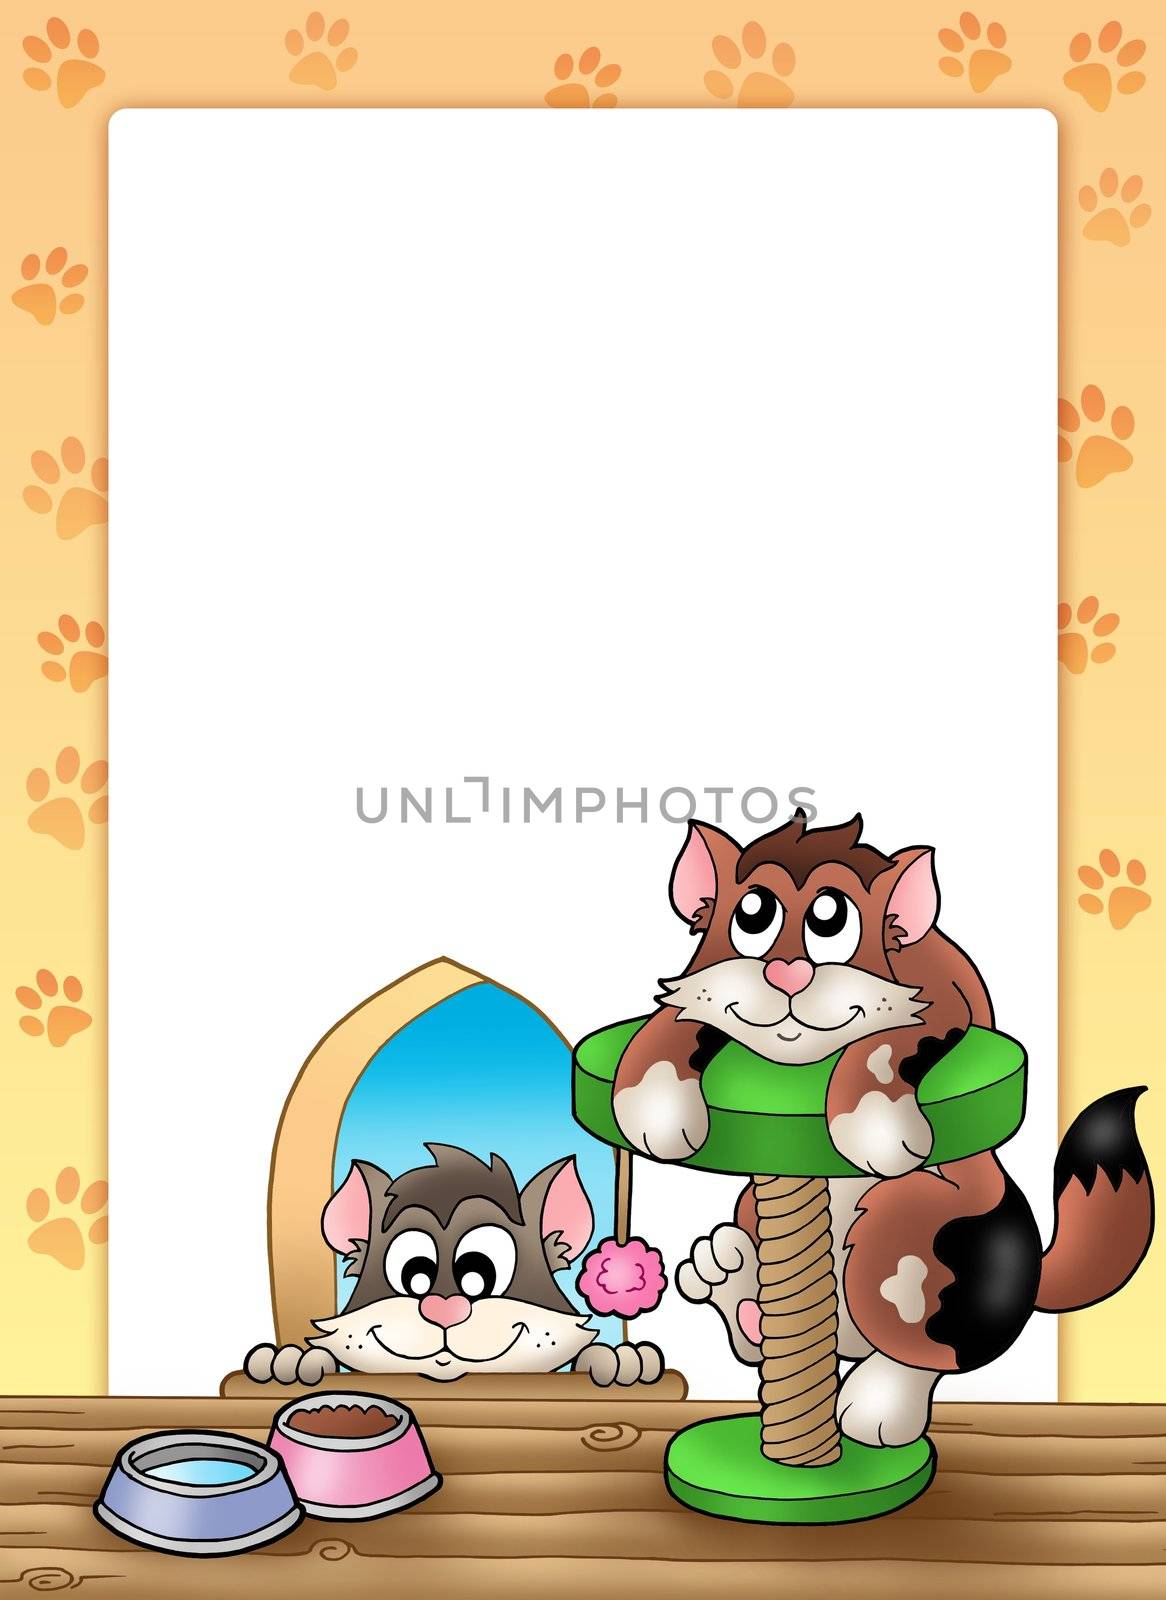 Frame with two smiling cats - color illustration.